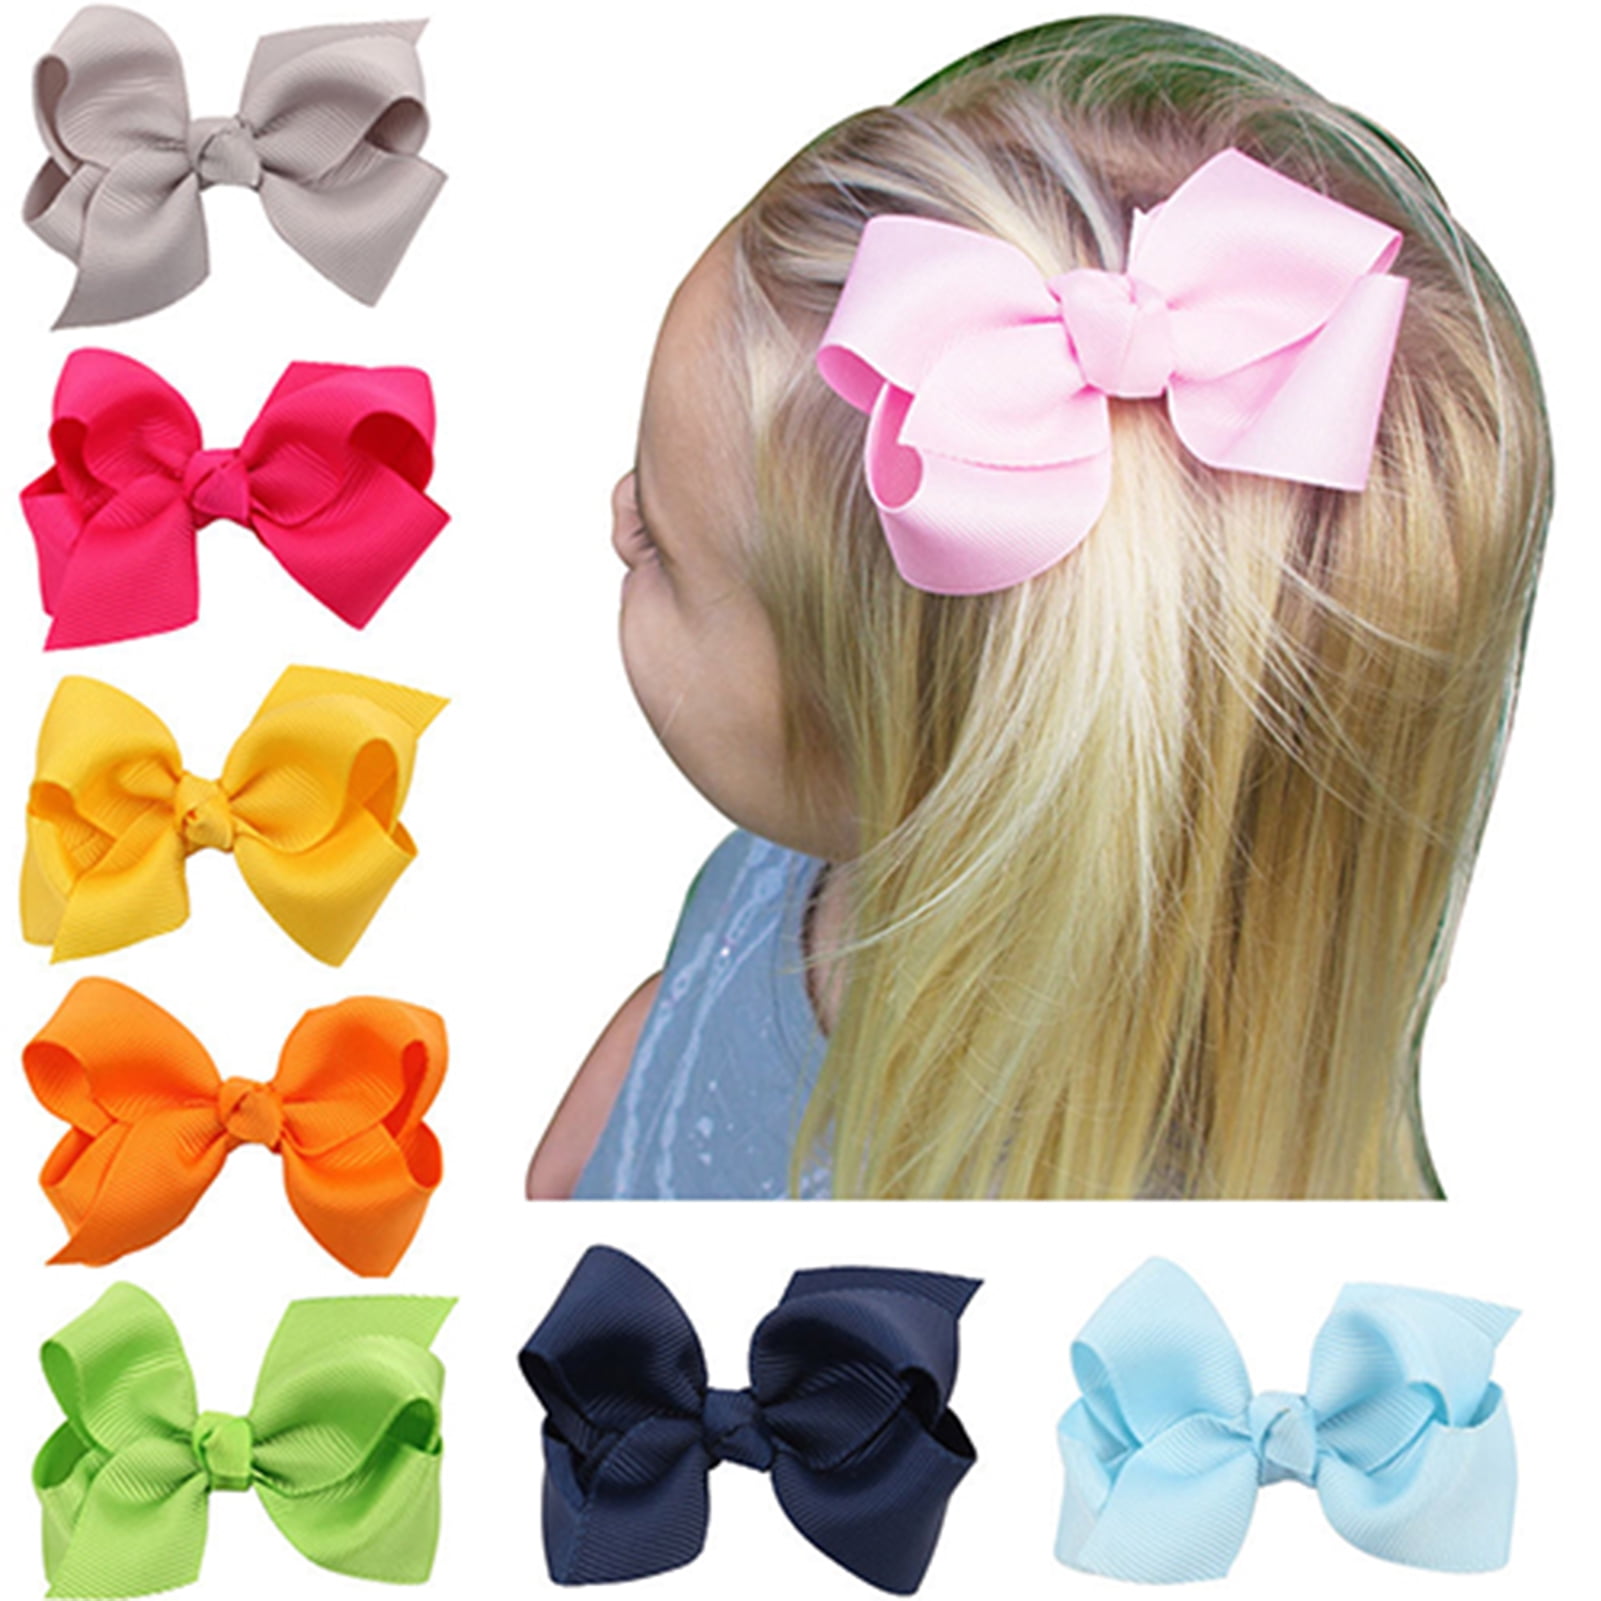 3.5" White Bowknot Cute Pearls Hair Bow With Alligator HairClip For Girls Kids 